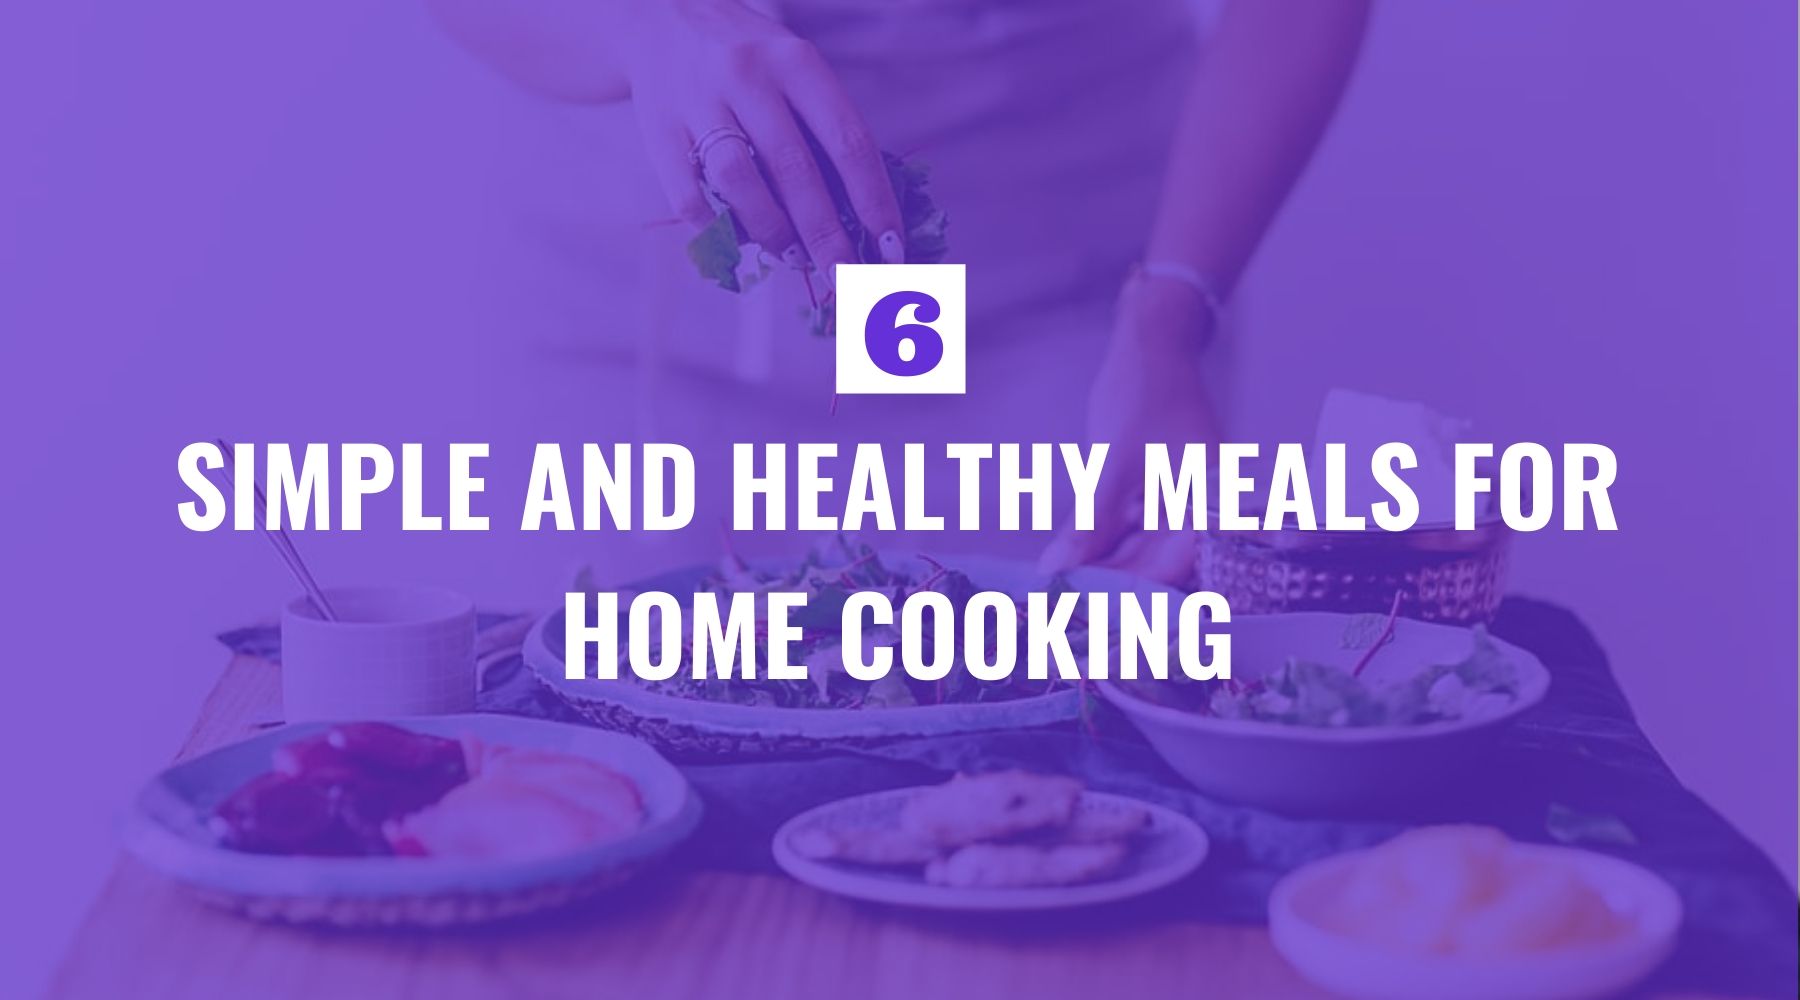 Six Simple and Healthy Meals for Home Cooking